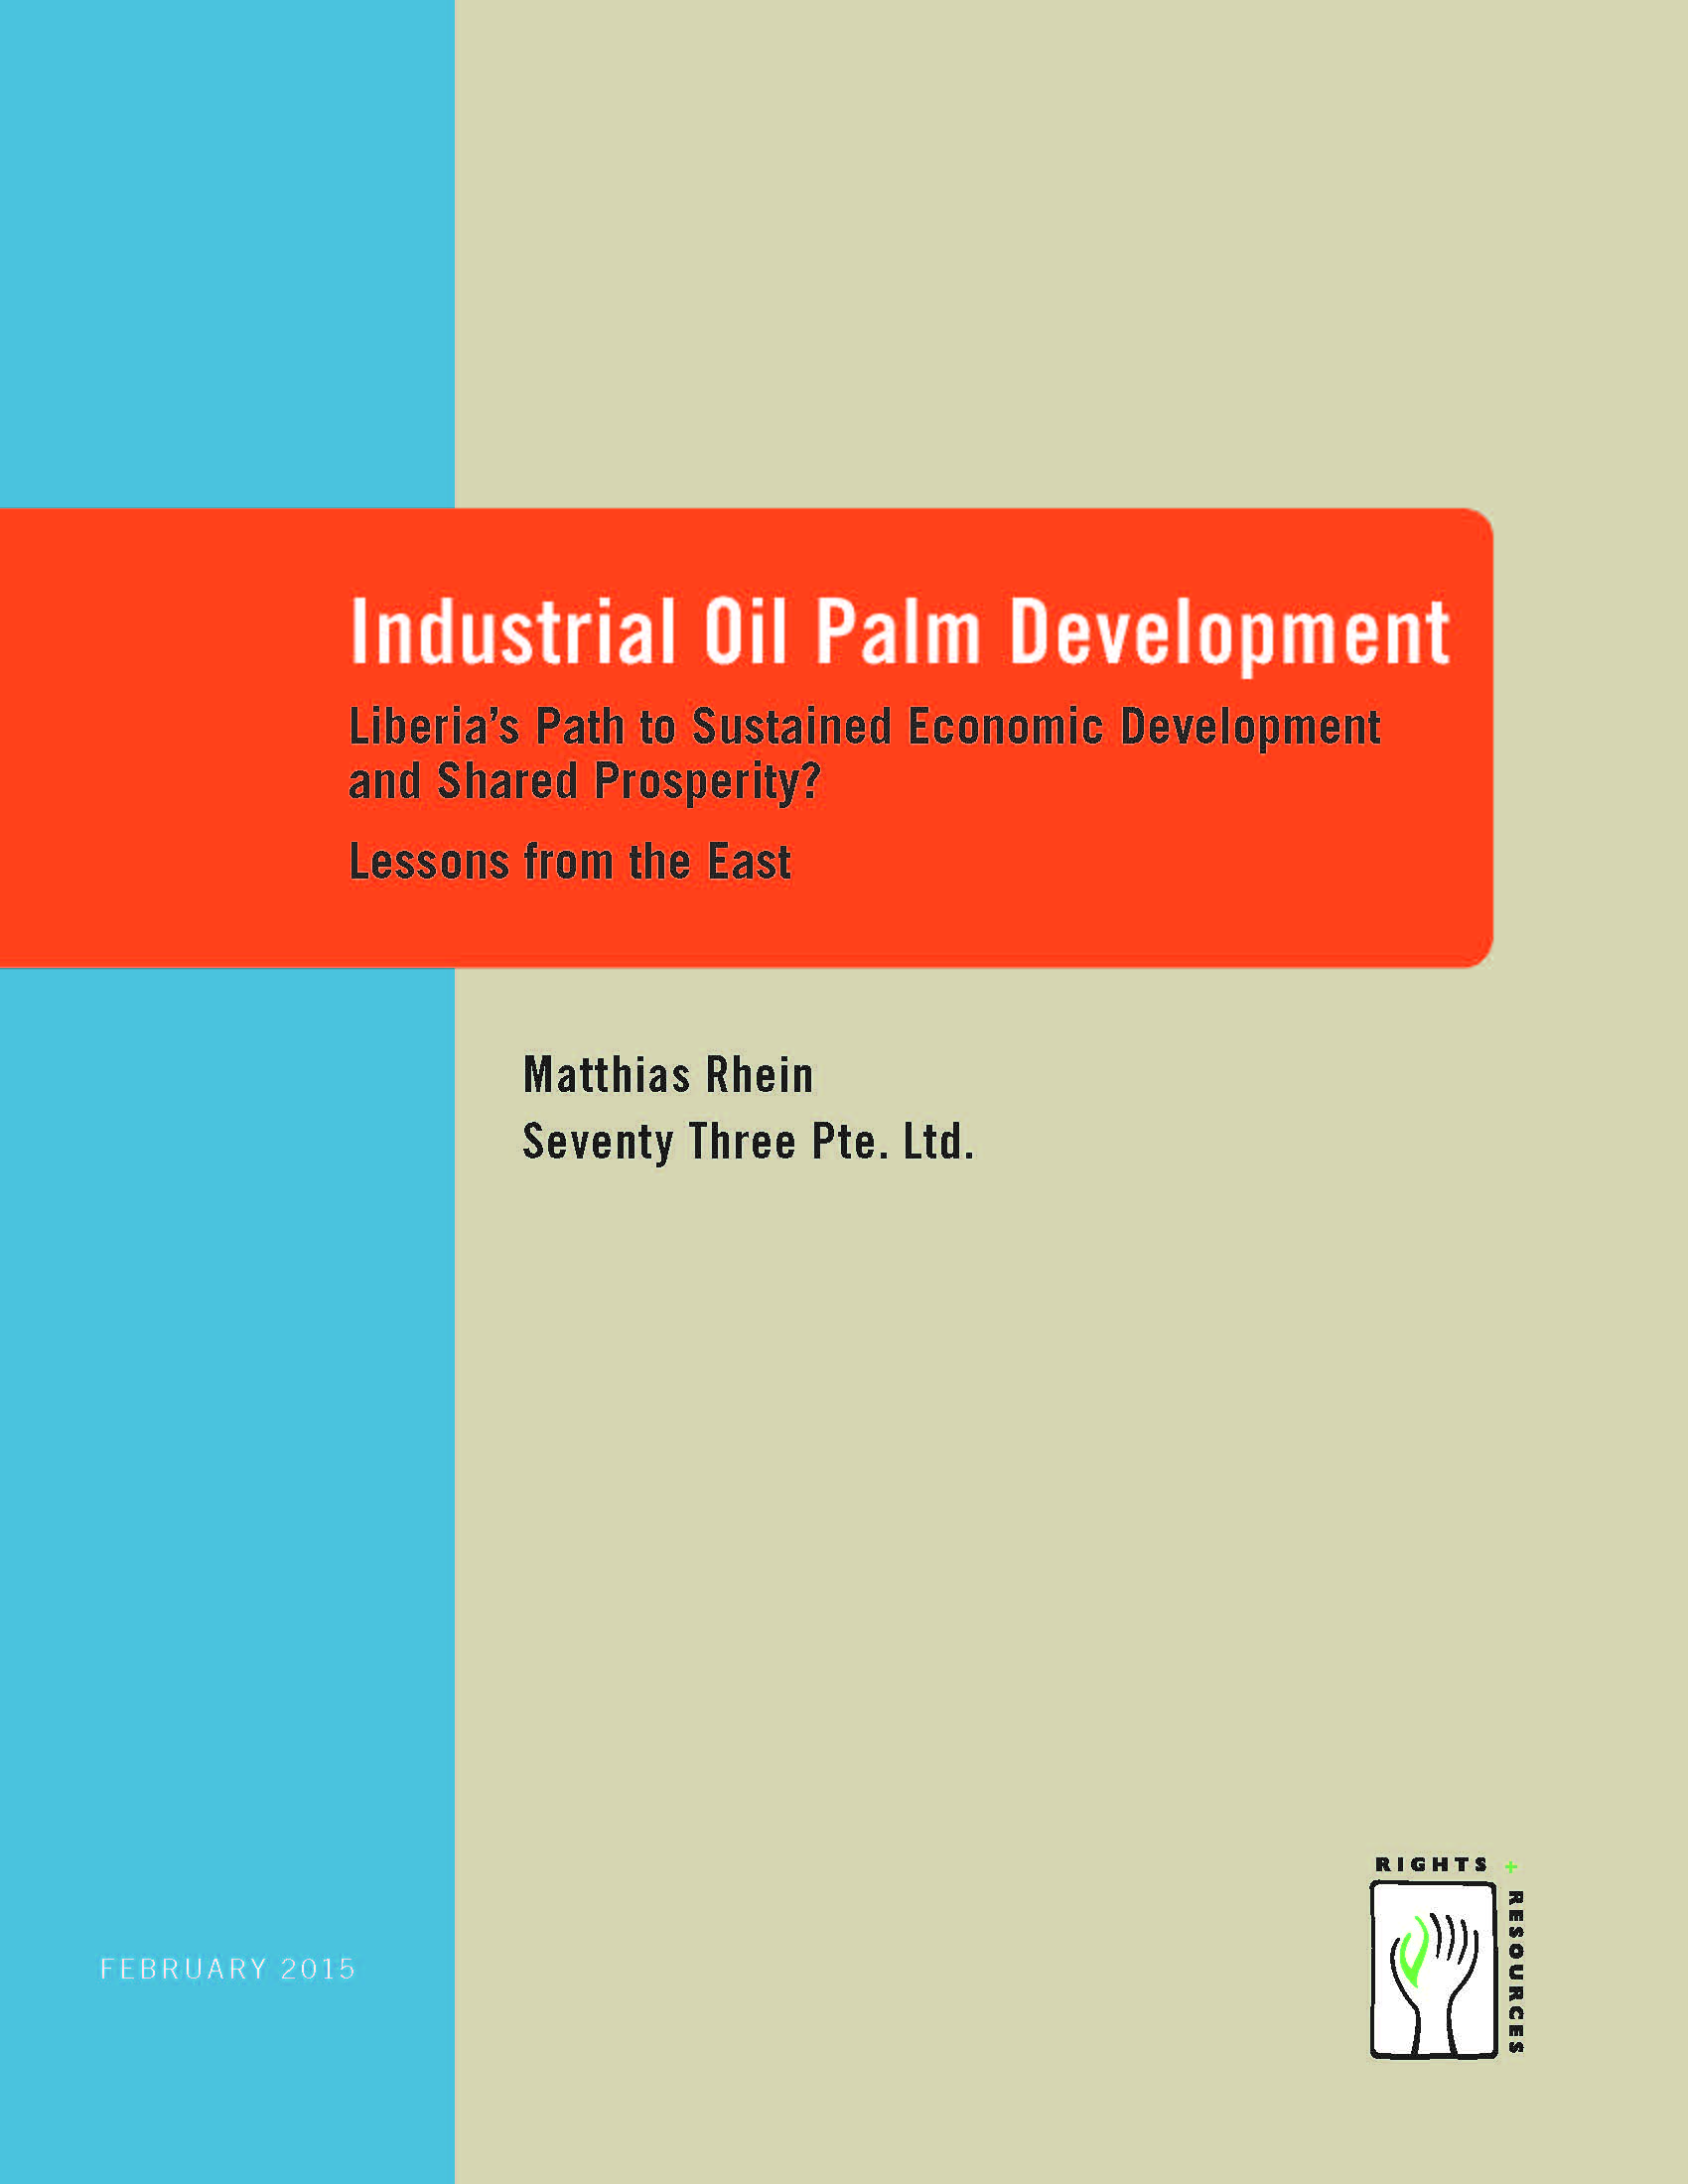 Industrial Oil Palm Development Liberia’s Path to Sustained Economic Development and Shared Prosperity? Lessons from the East